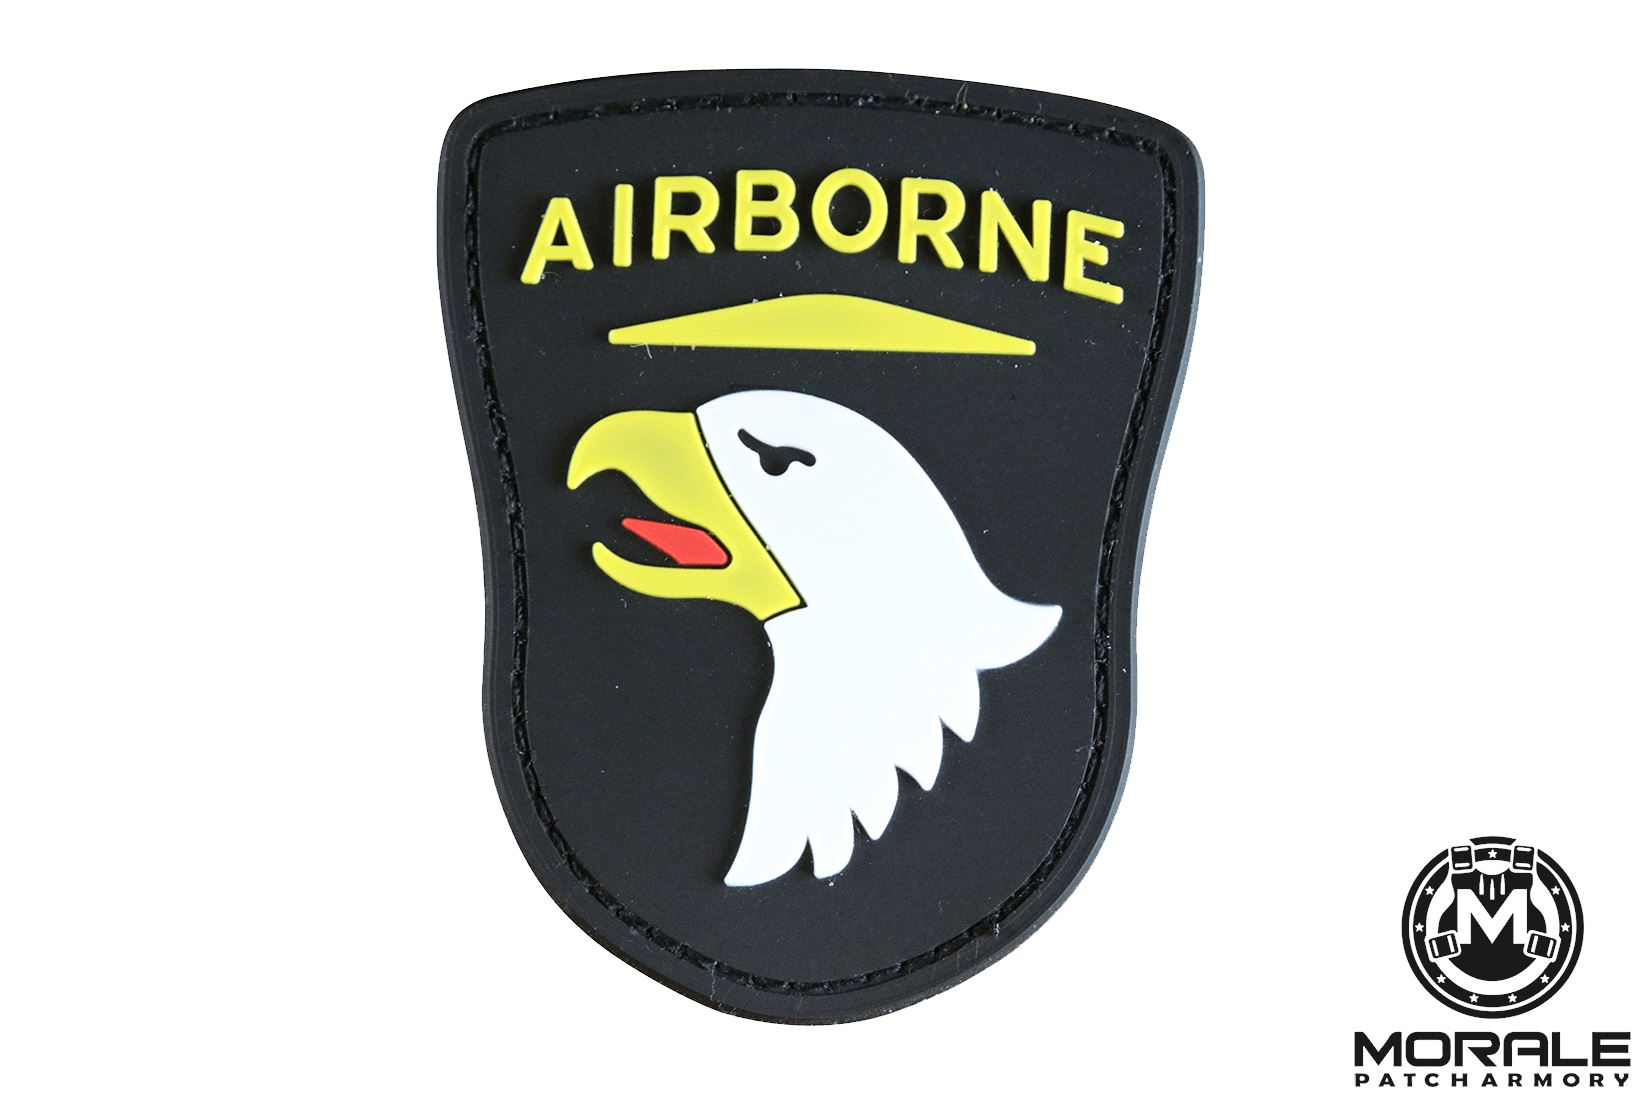 ECUSSON - PATCH 3D PVC SCRATCH MILITARY POLICE POLICE MILITAIRE